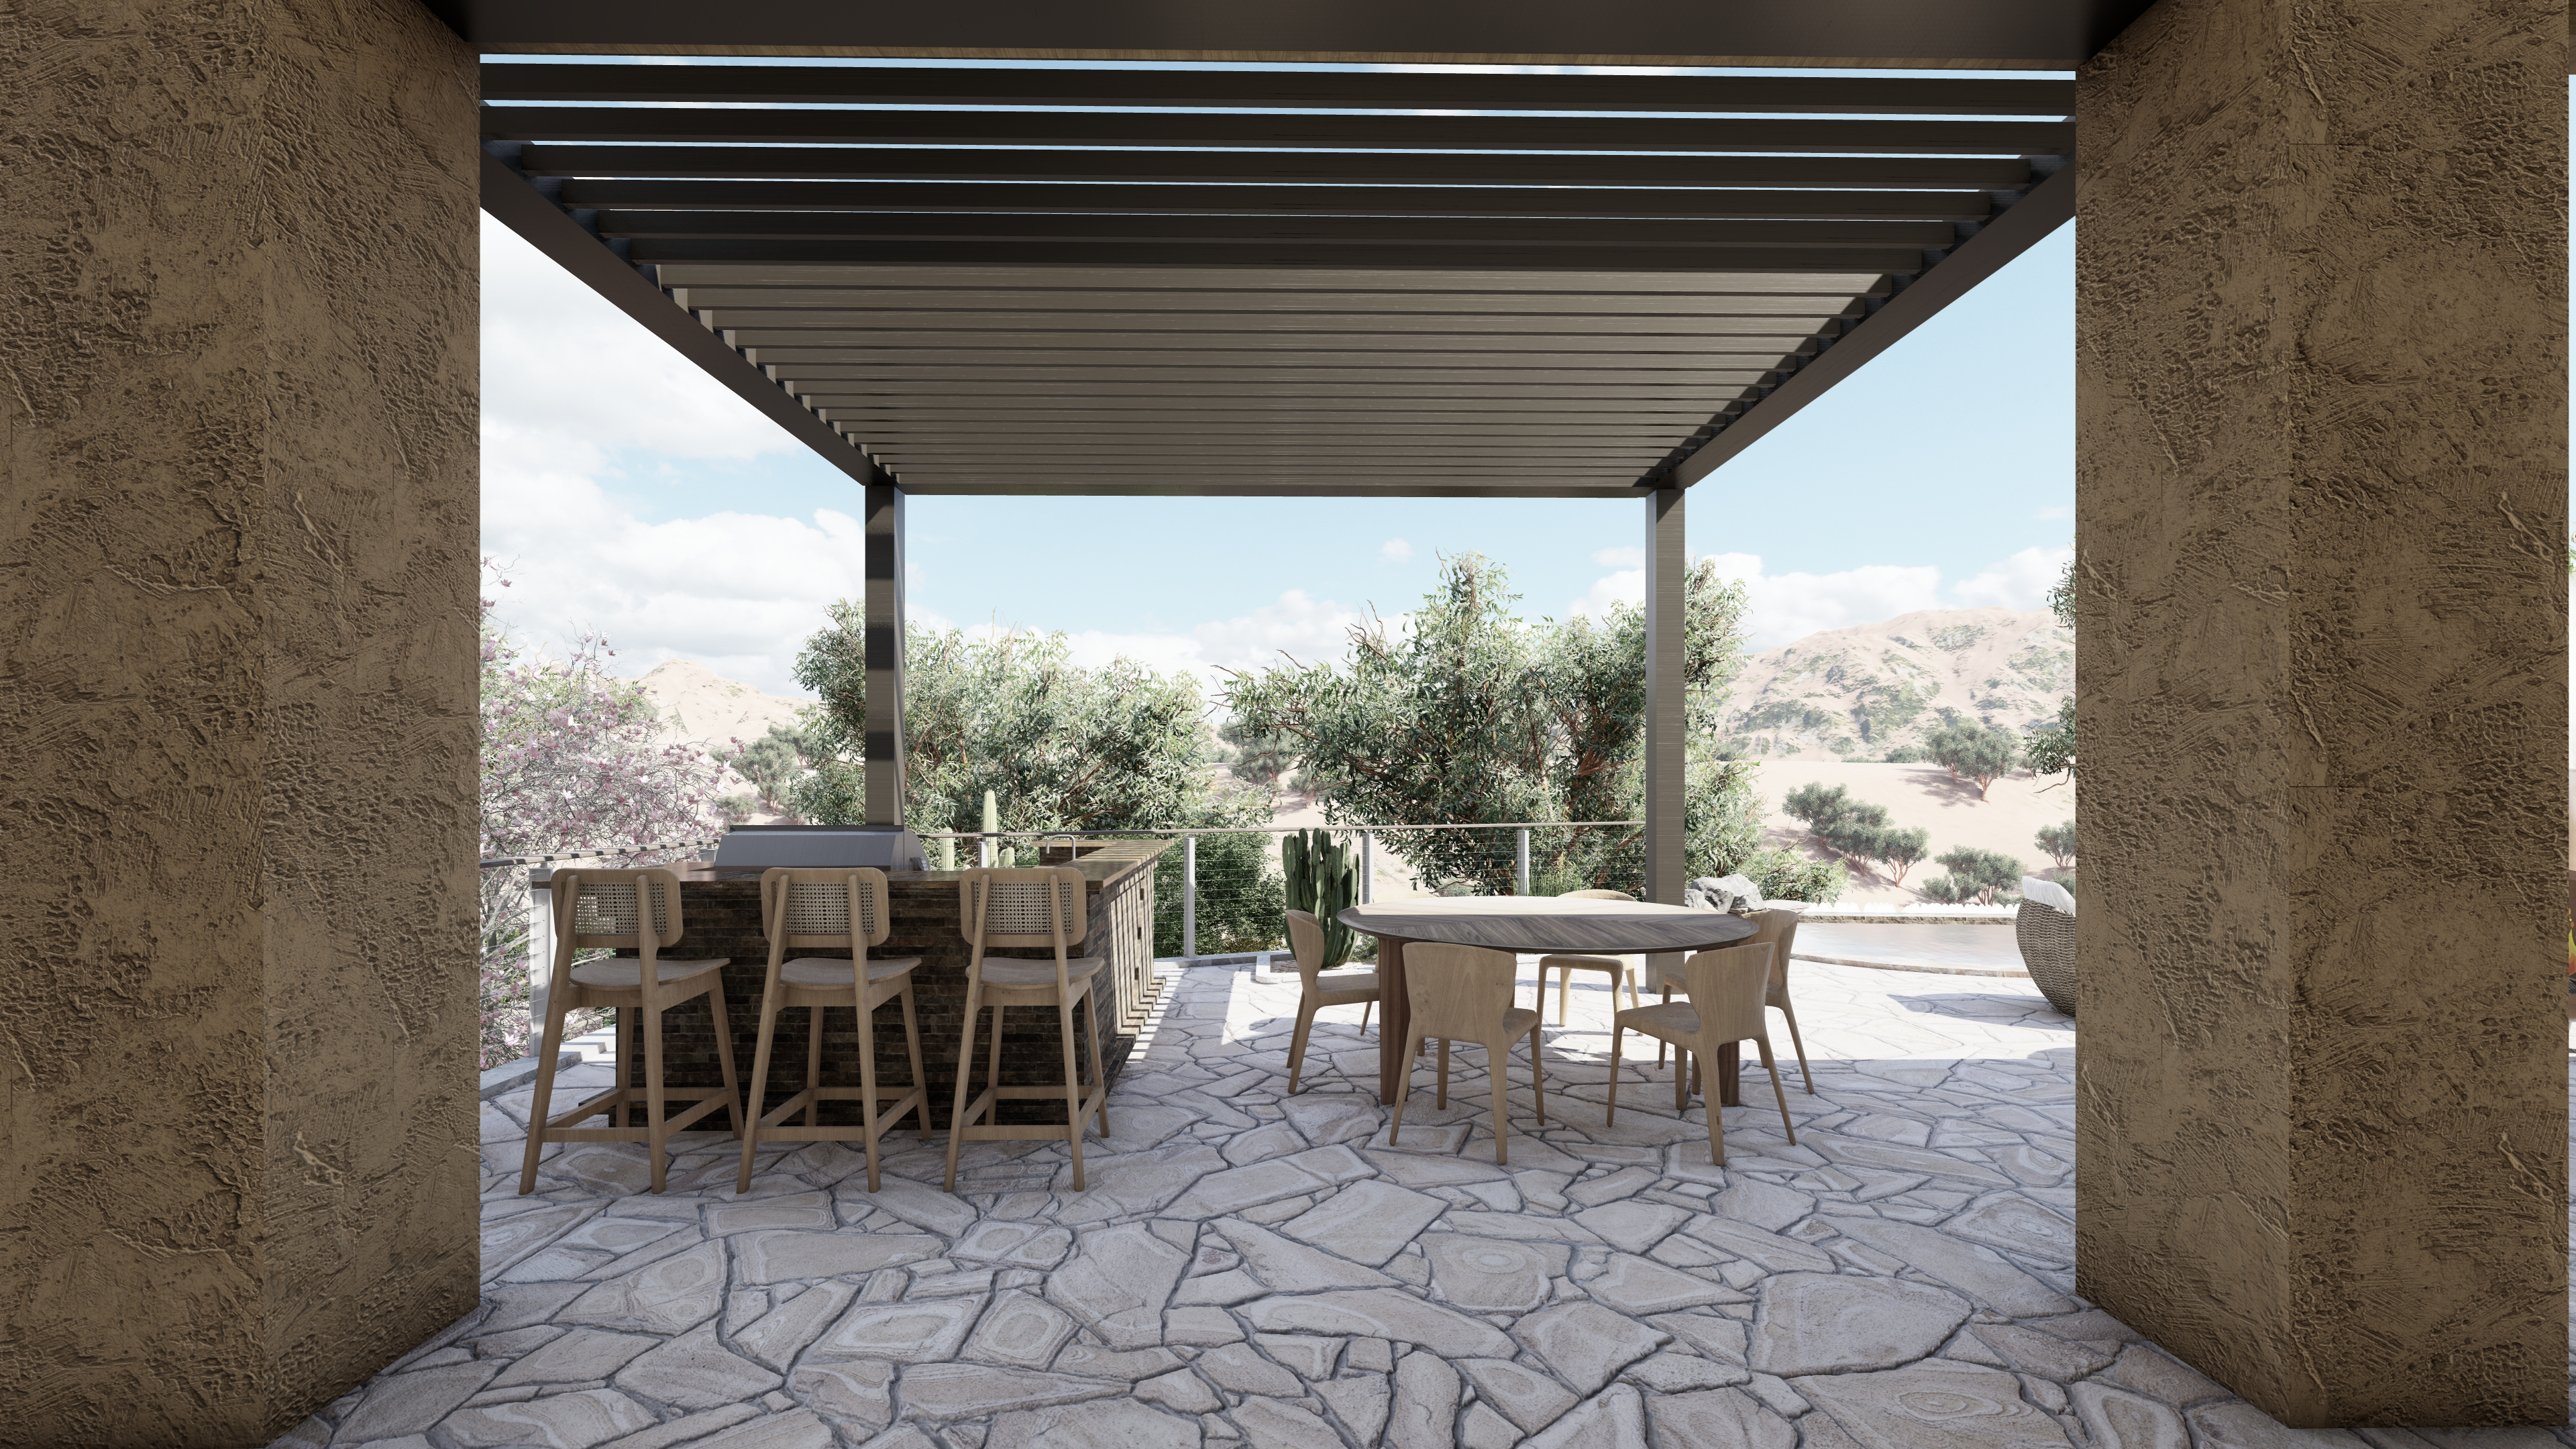 Desert landscaping should include smart ideas for shade like this covered patio